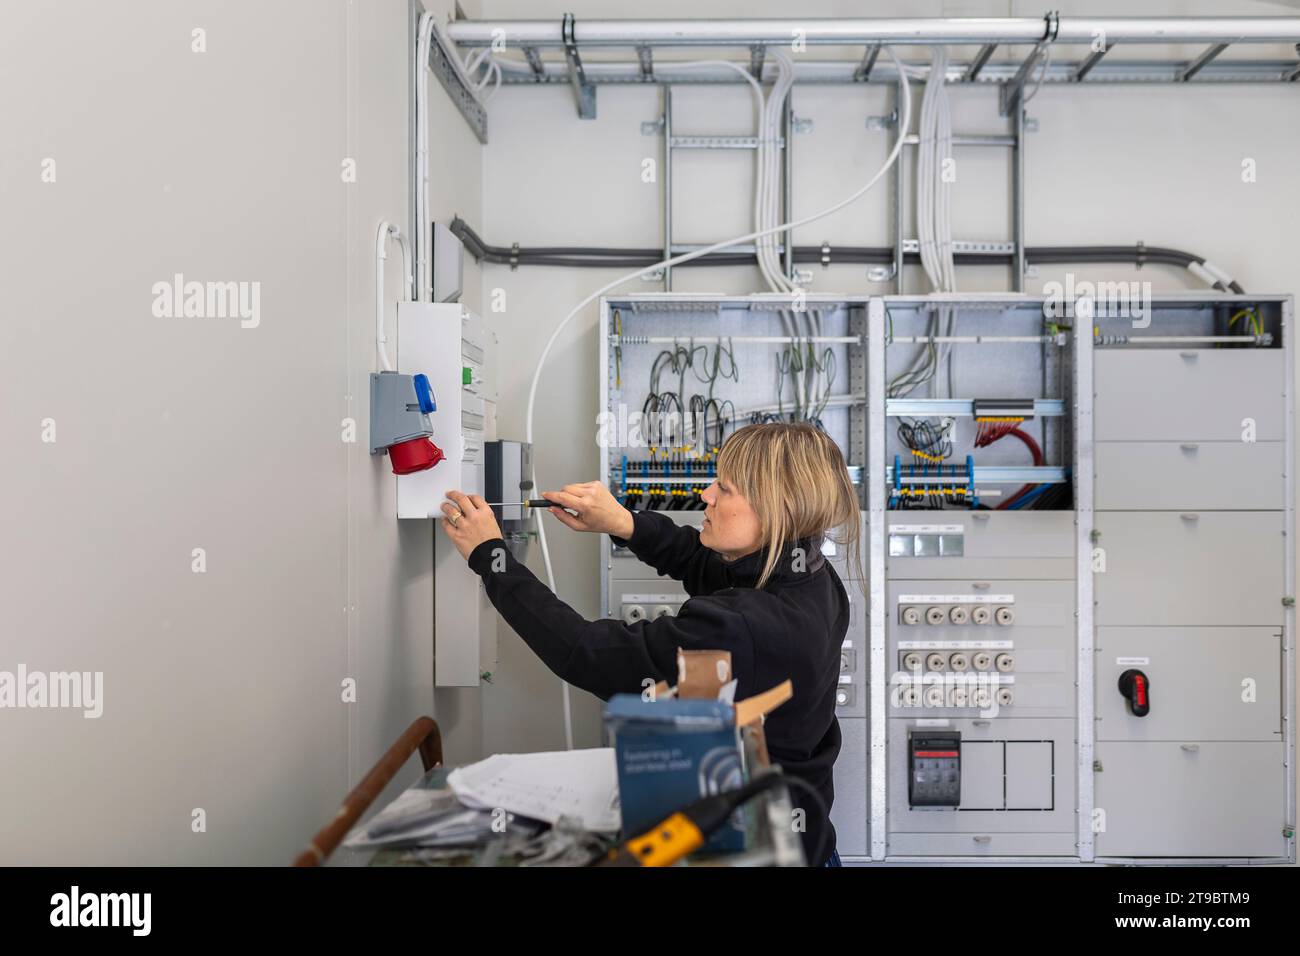 Female technician installing fuse box in control room at industry Stock Photo